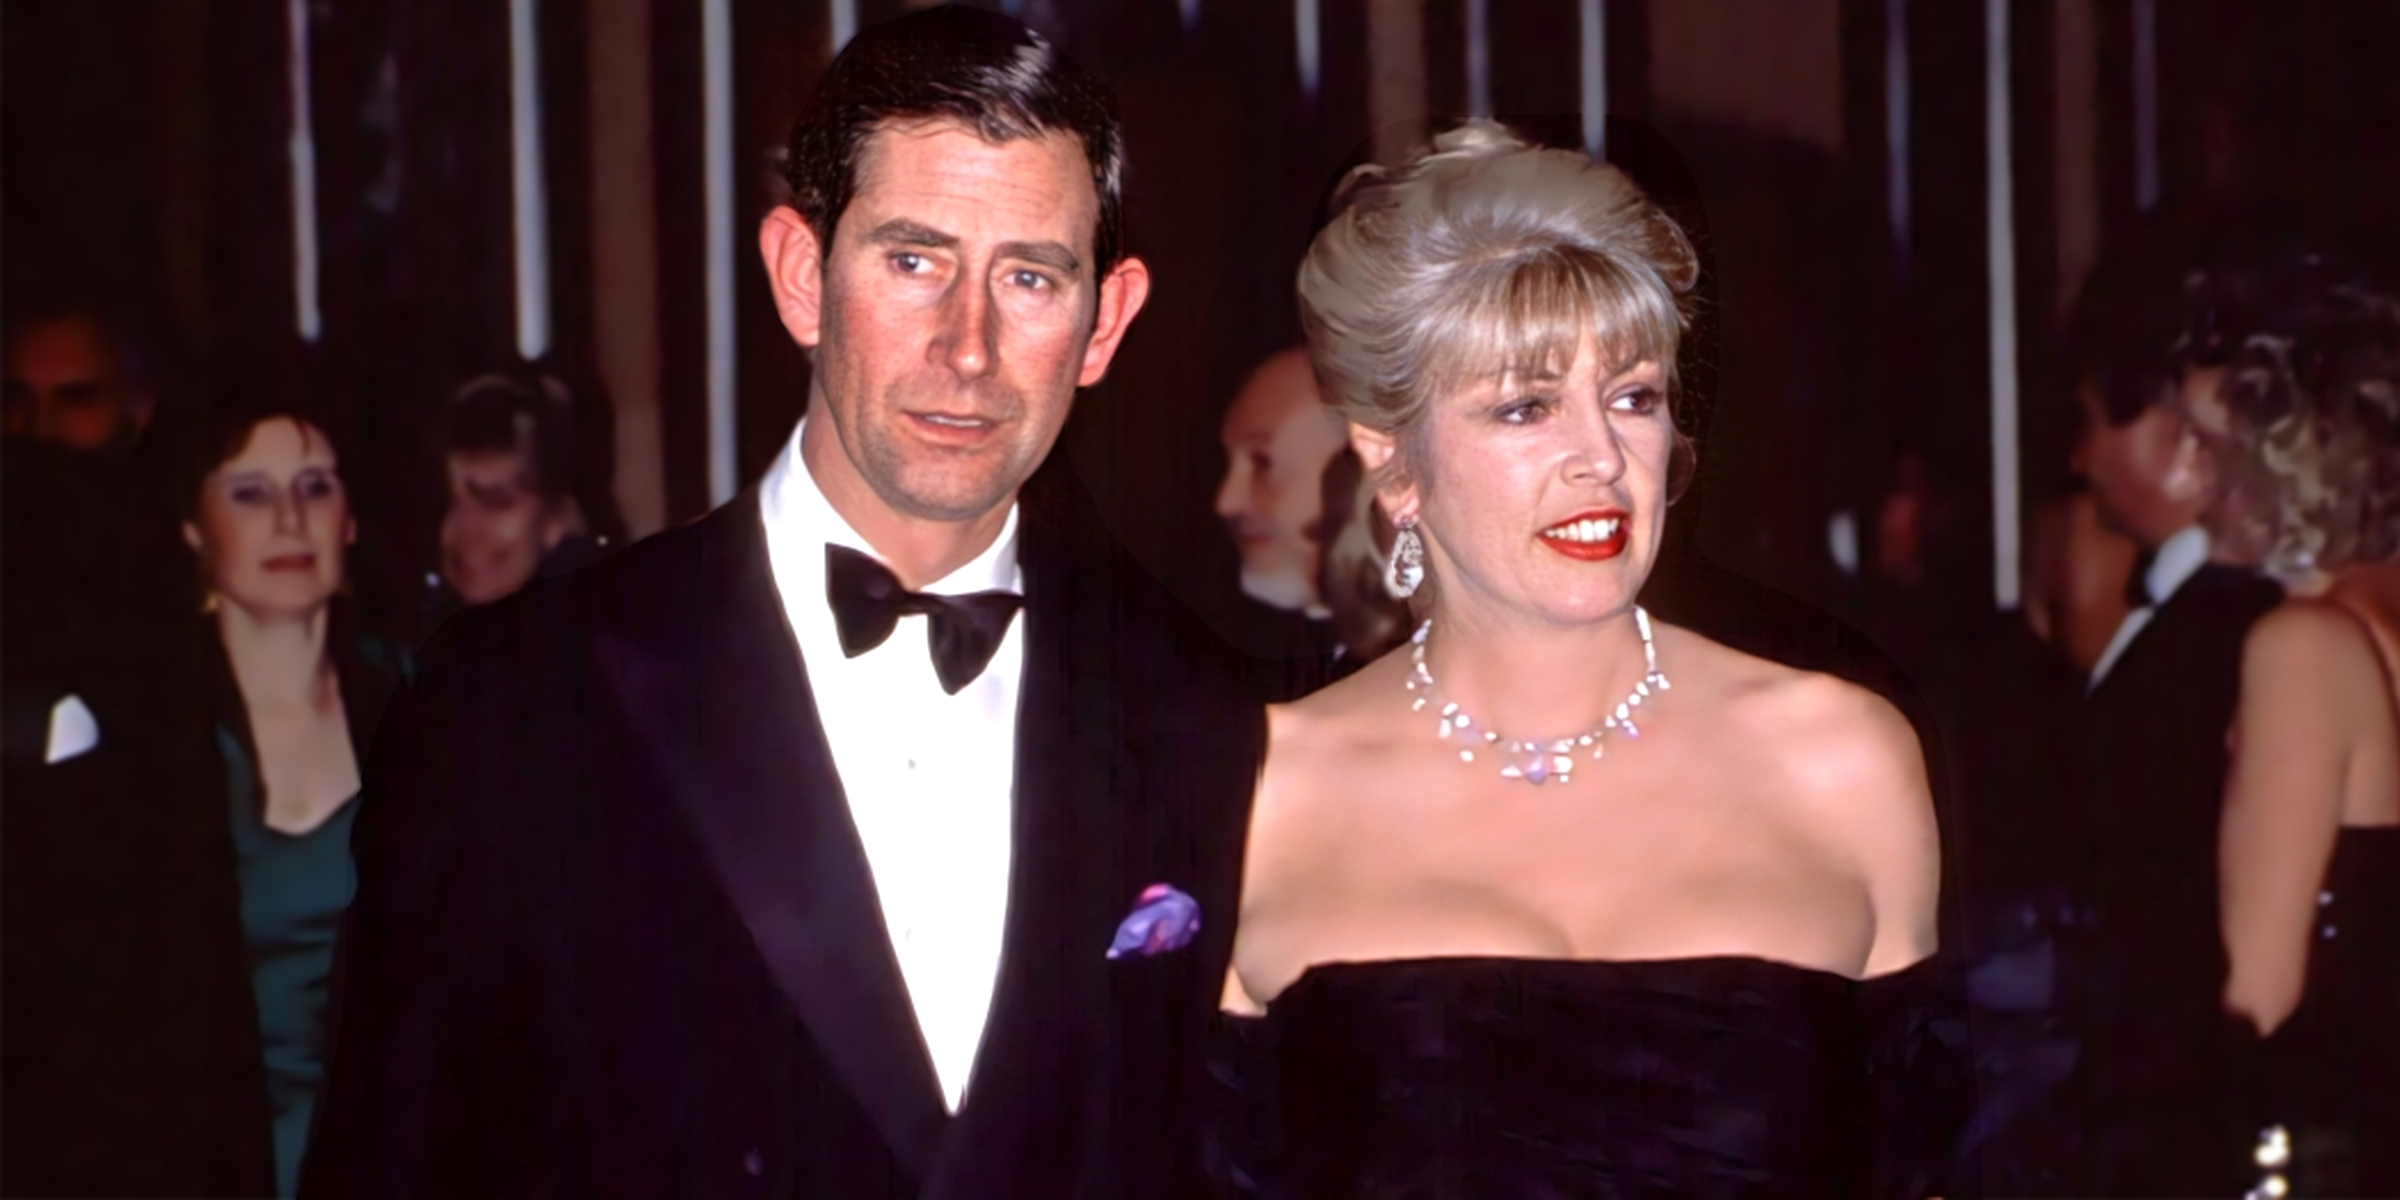 Prince Charles and Lady Dale Tryon | Source: Getty Images